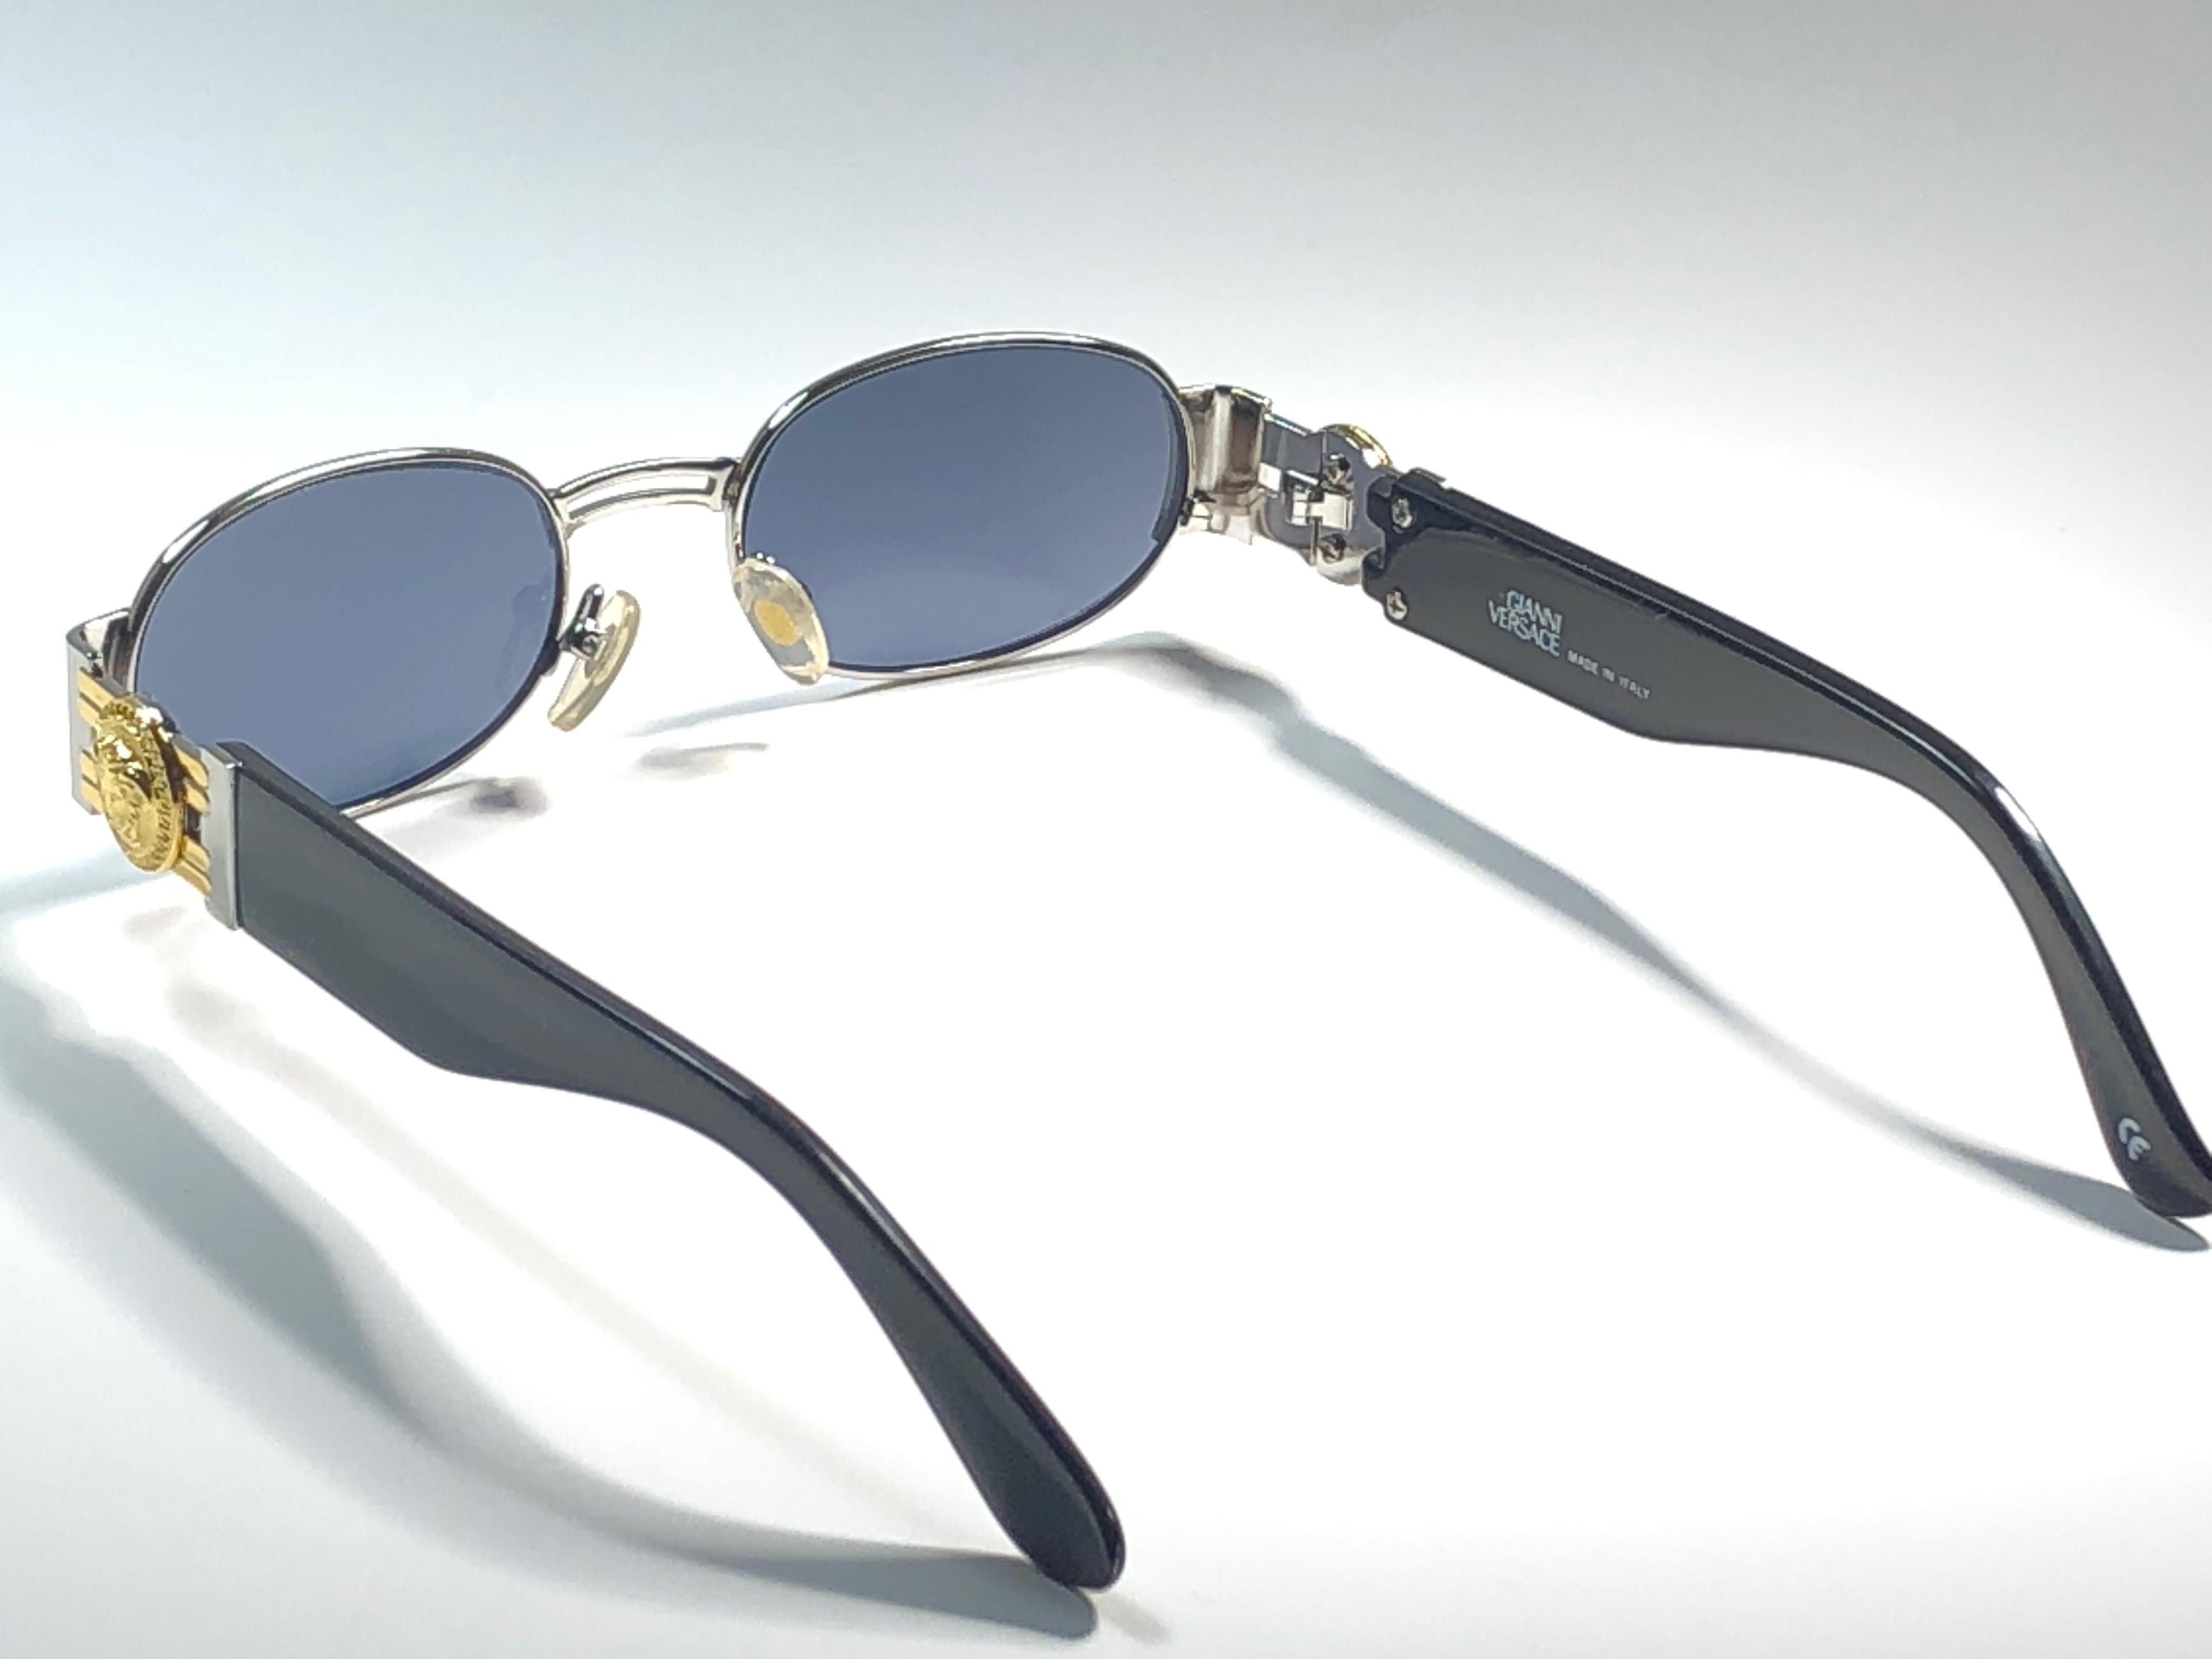 Gray Vintage Gianni Versace Mod S80 Oval Small Sunglasses 1990's Made in Italy